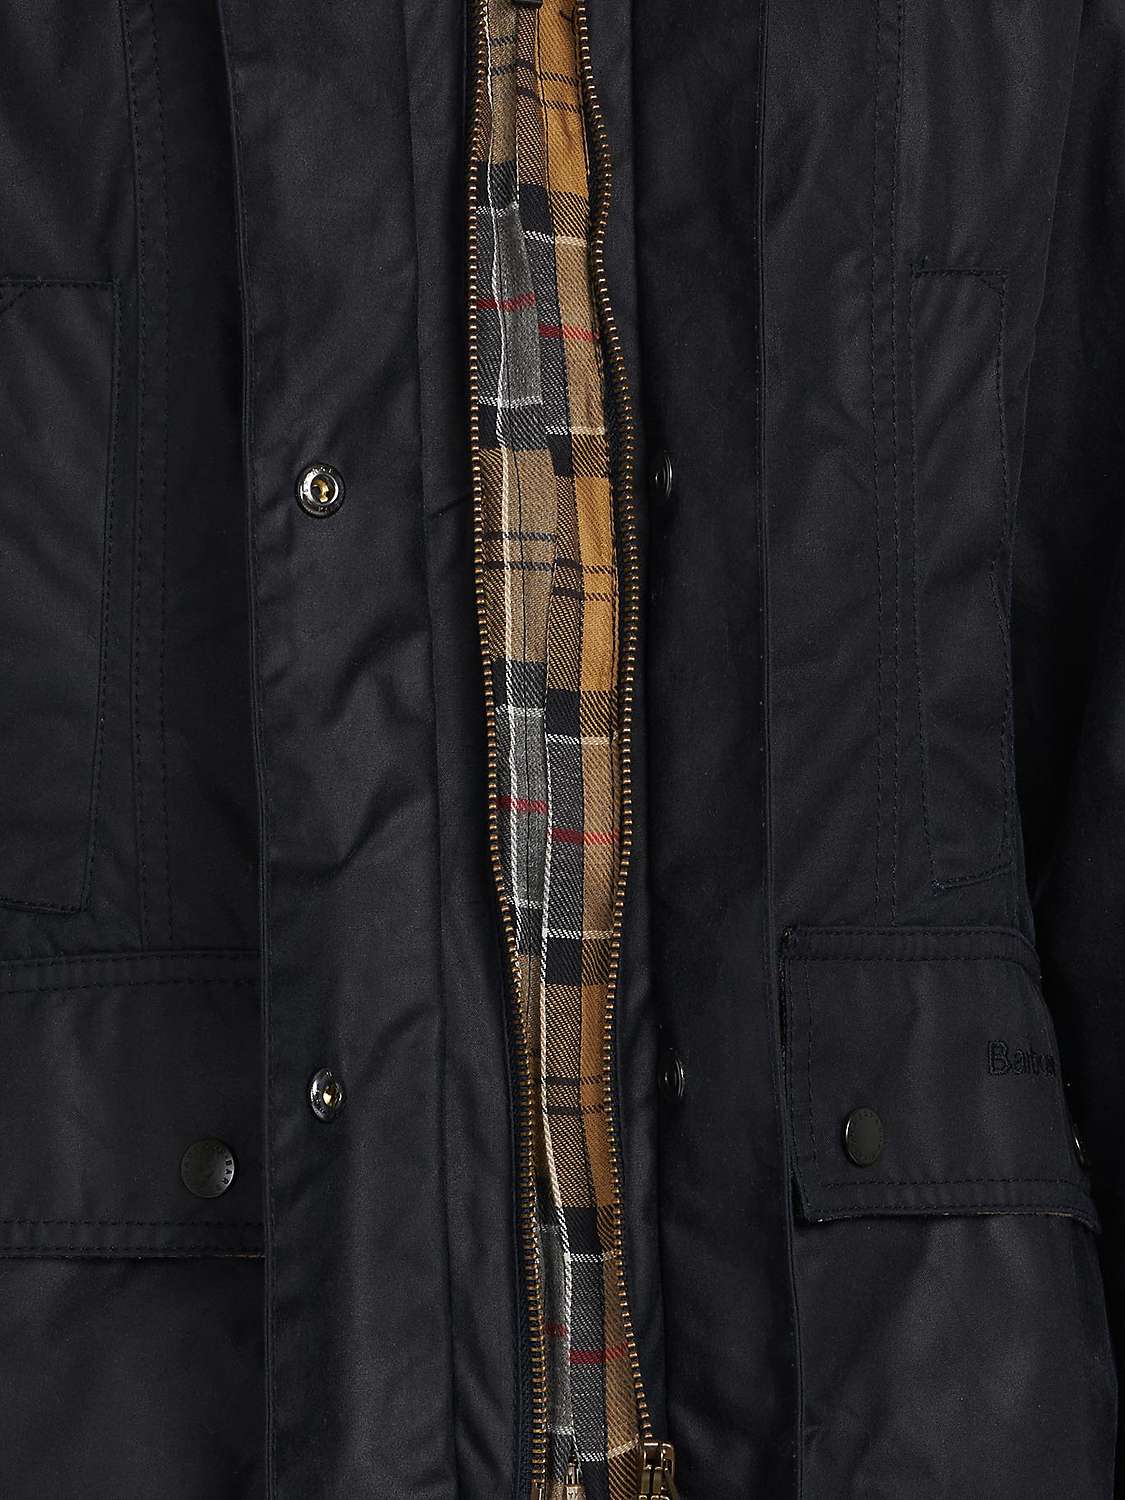 Buy Barbour Tartan Beadnell Waxed Jacket, Navy Online at johnlewis.com